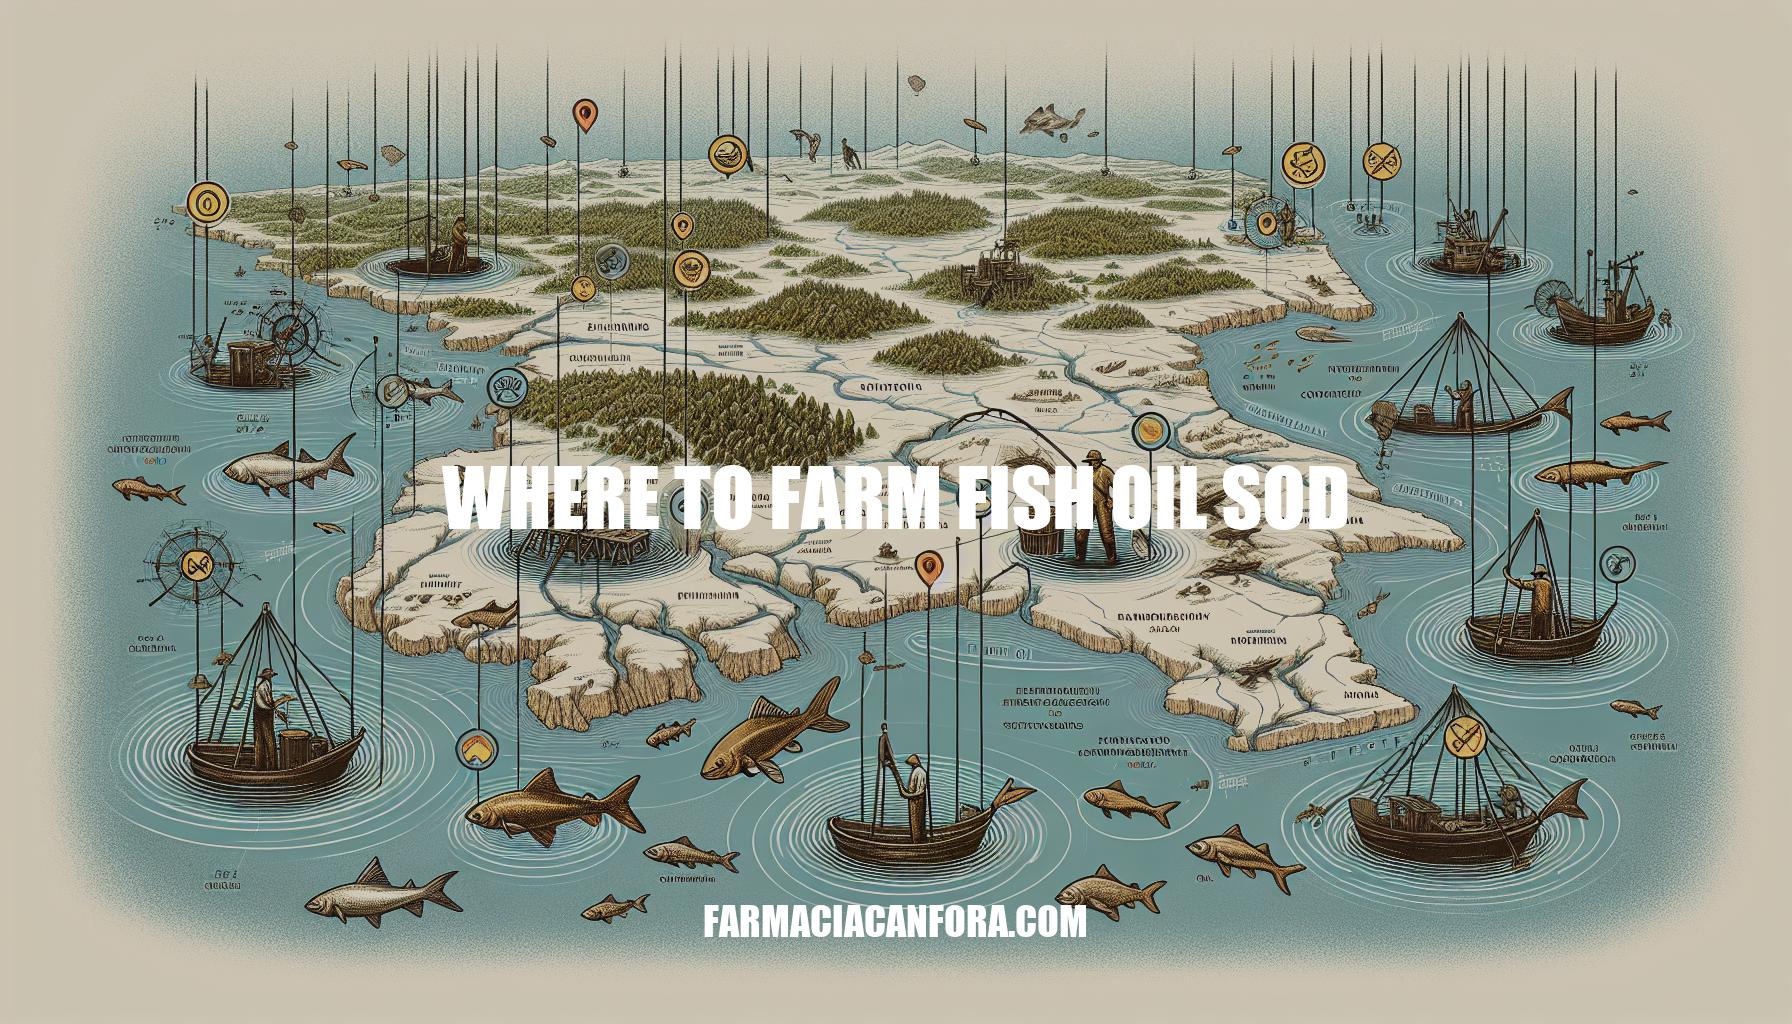 Where to Farm Fish Oil SOD: Best Locations and Techniques